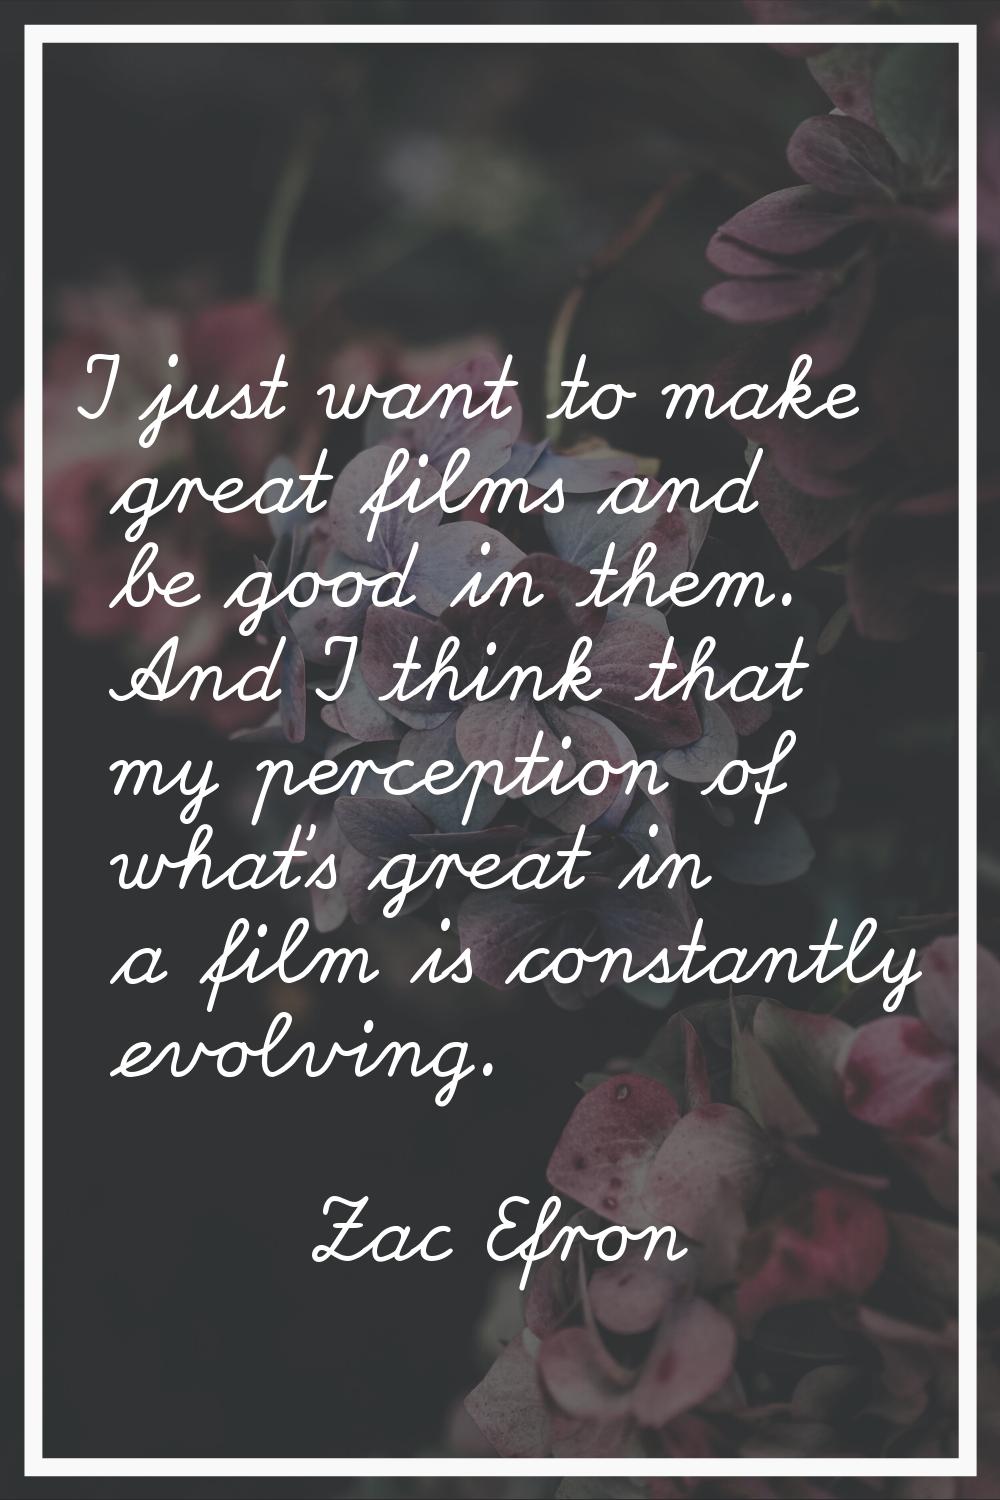 I just want to make great films and be good in them. And I think that my perception of what's great